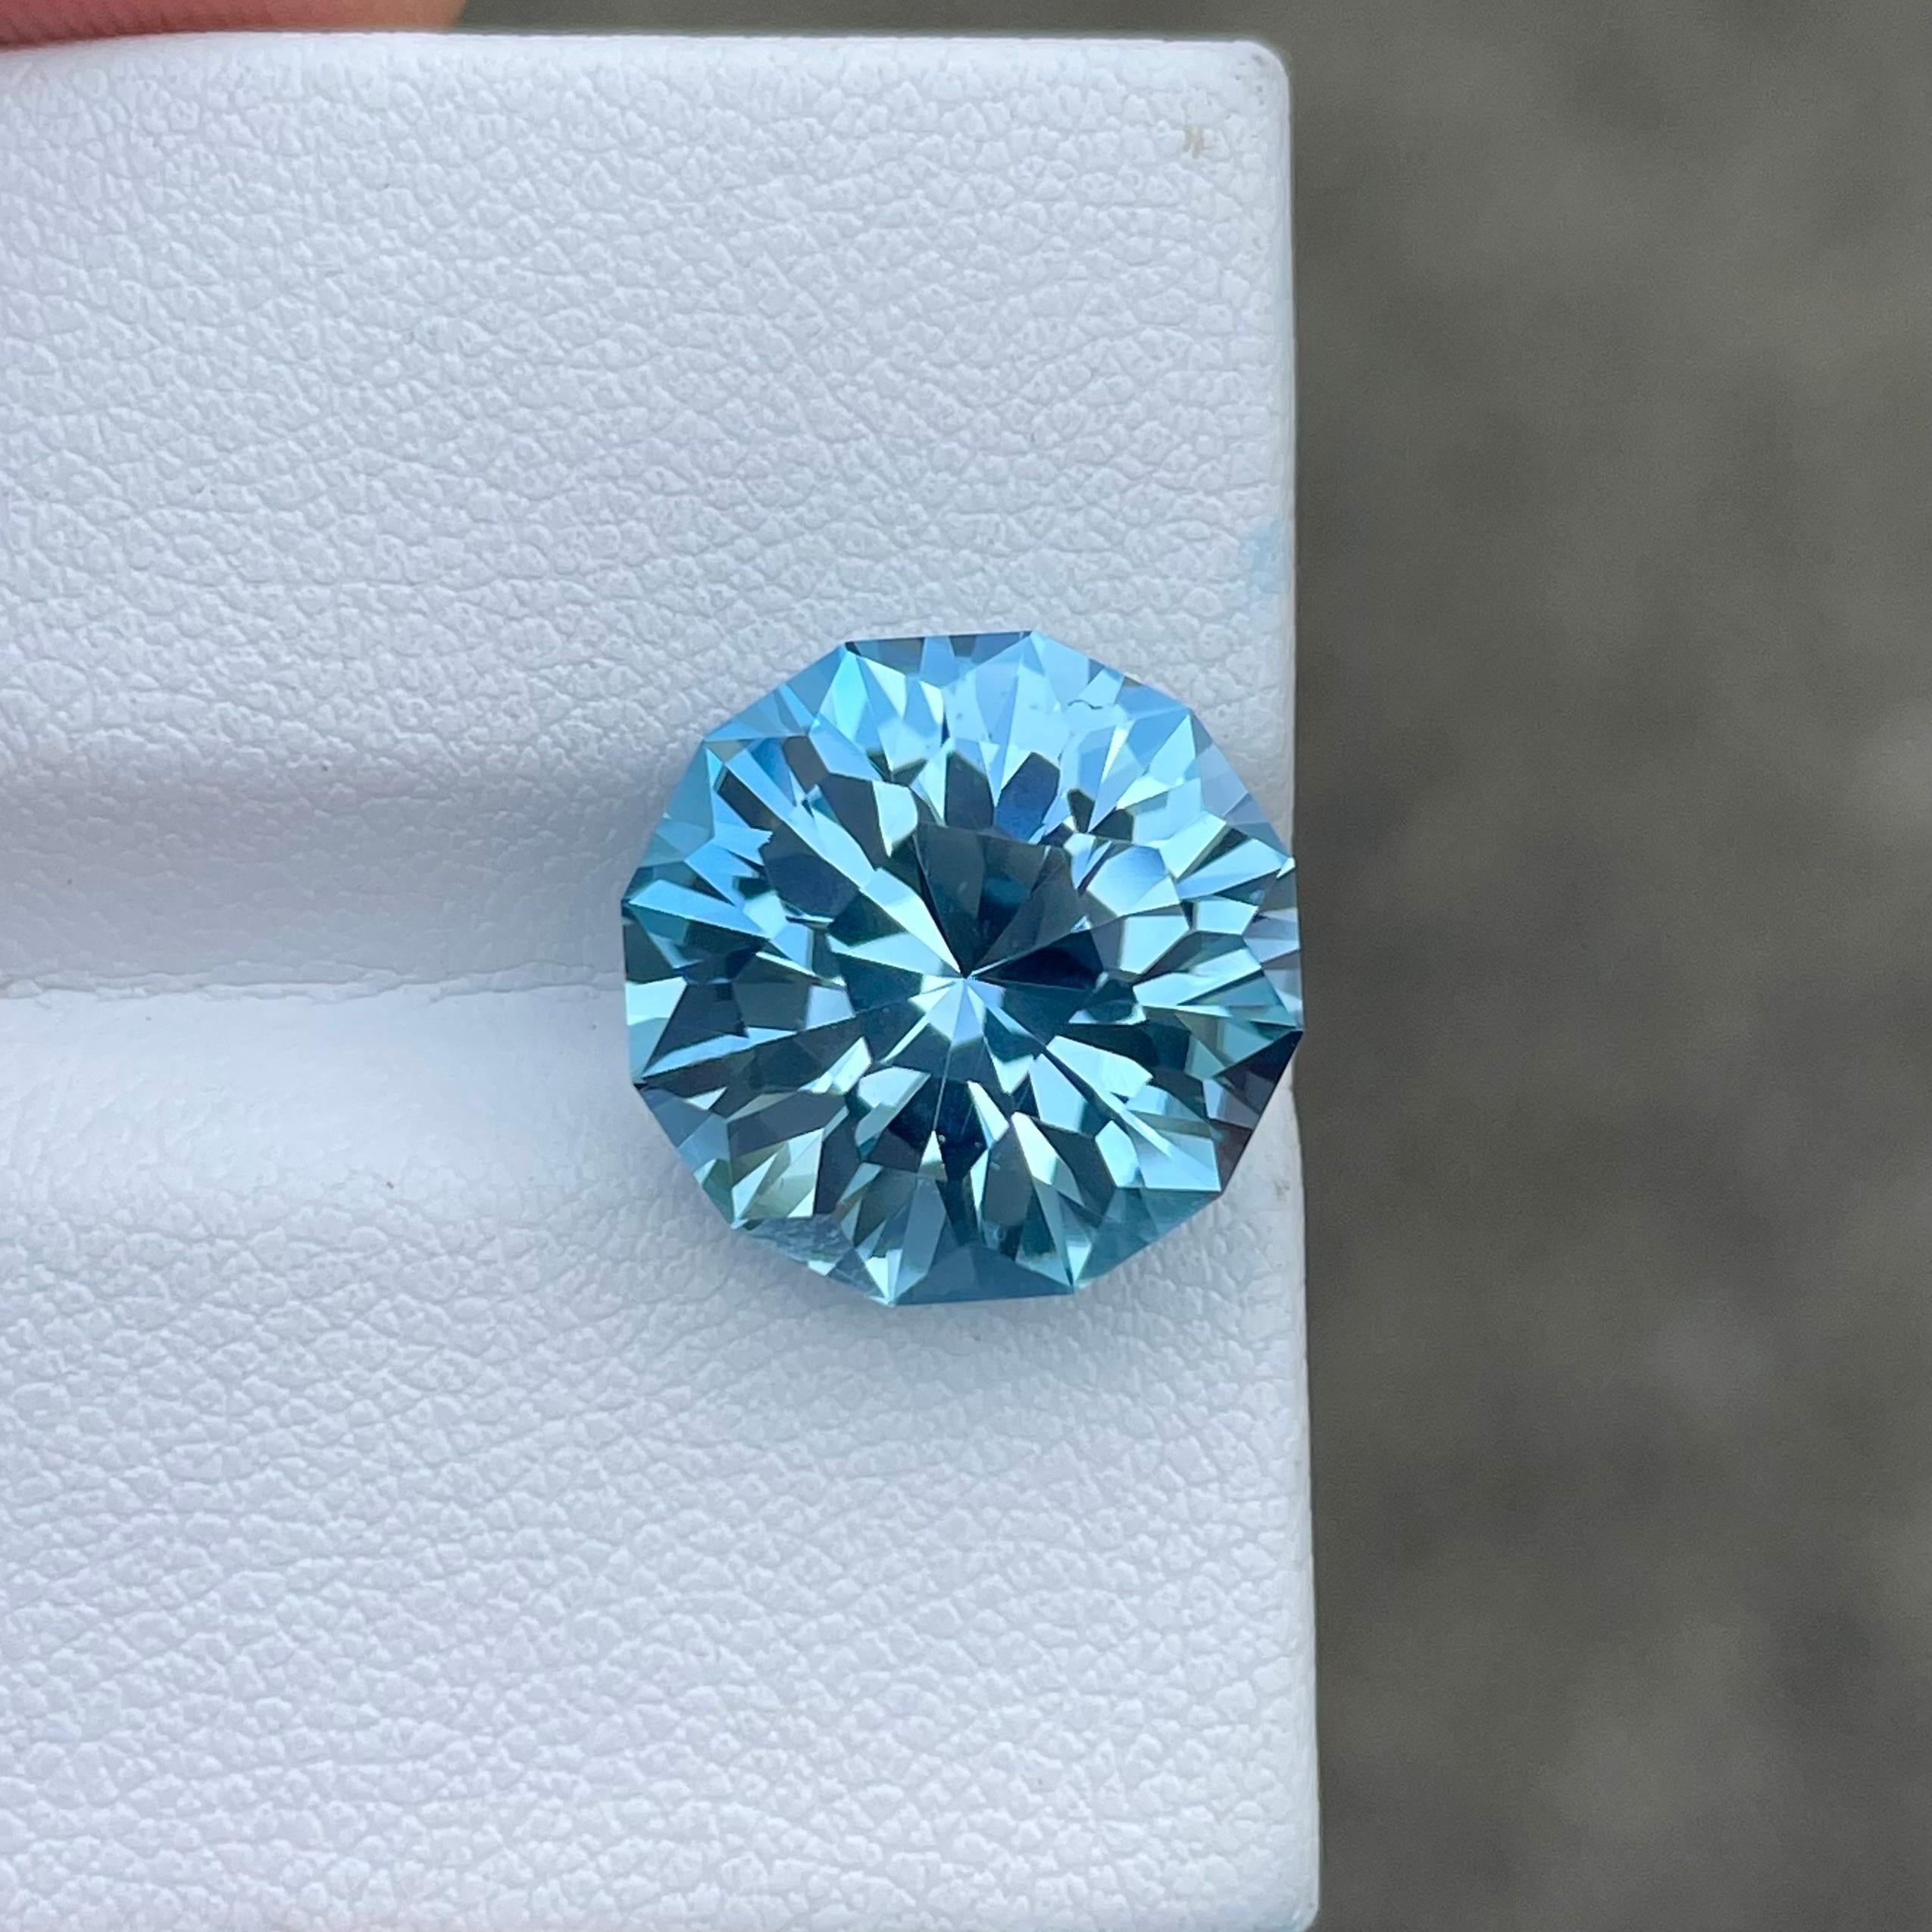 Round Cut Jewel-Toned Honey Comb Swiss Blue Topaz 12.10 carats Natural Gem from Madagascar For Sale